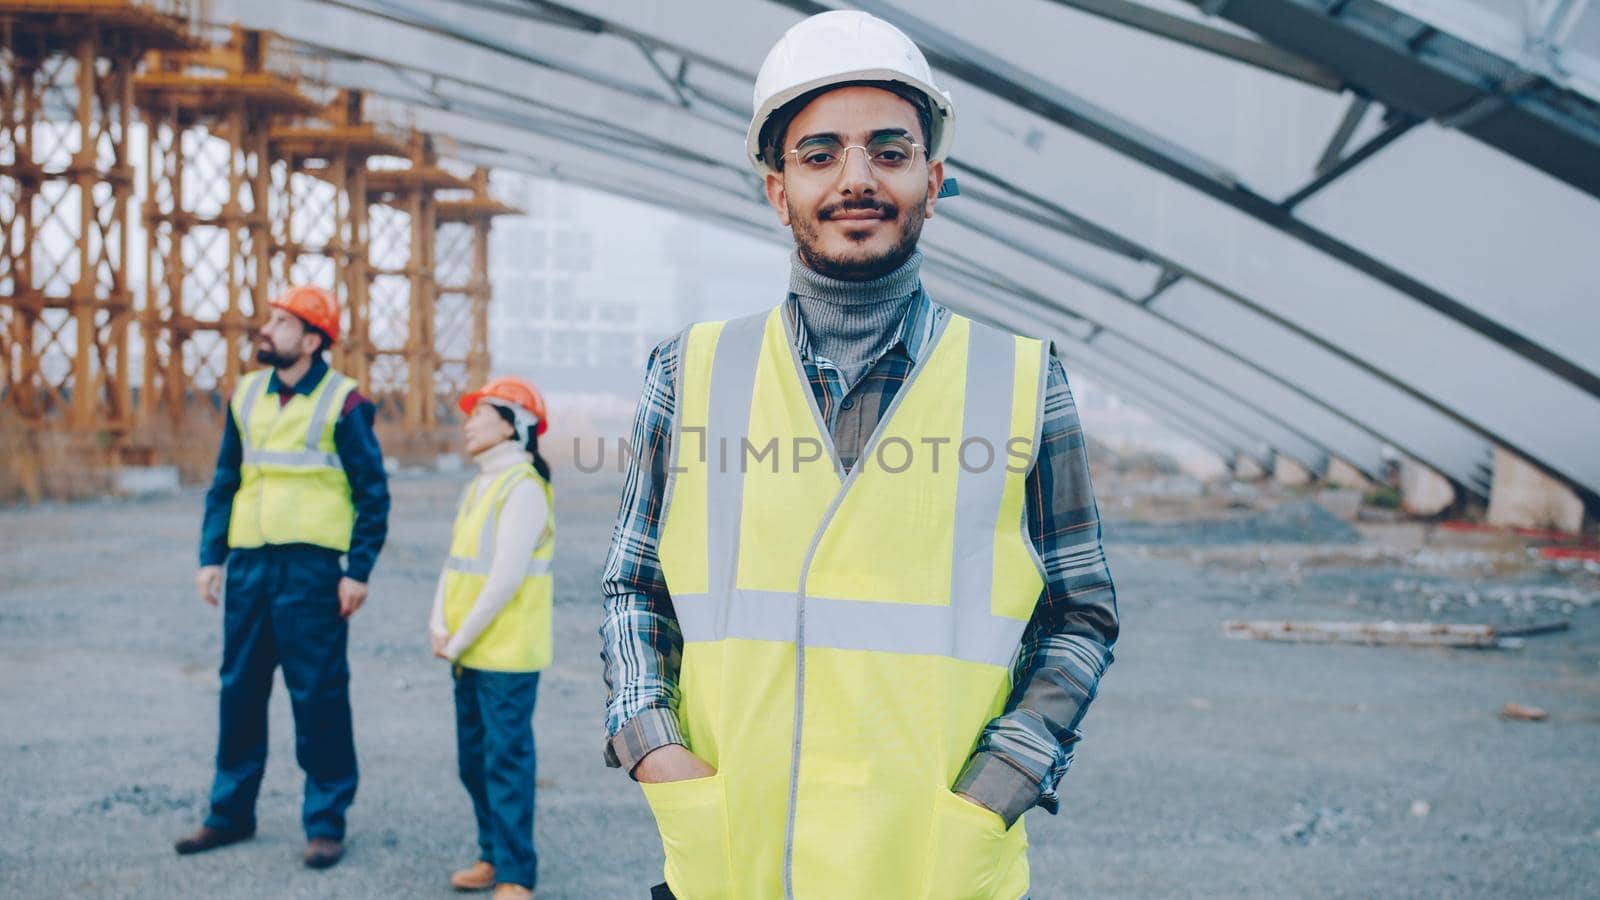 portrait of Arab man wearing safety helmet and vest standing in construction site by silverkblack